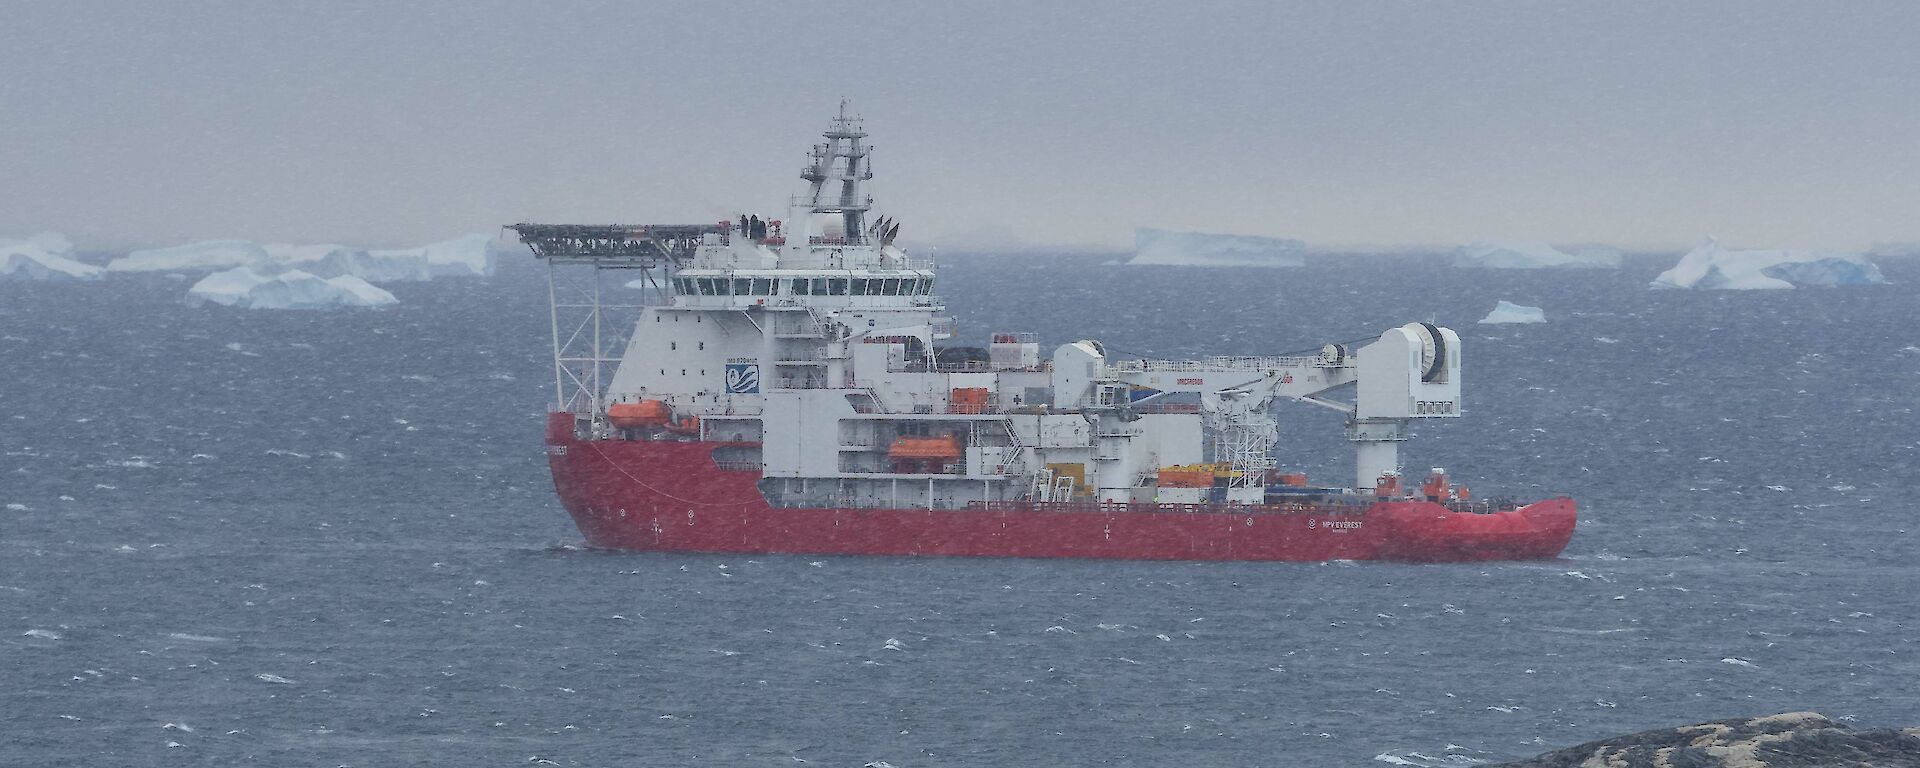 A red supply ship sailing away from the land with icebergs in the distance